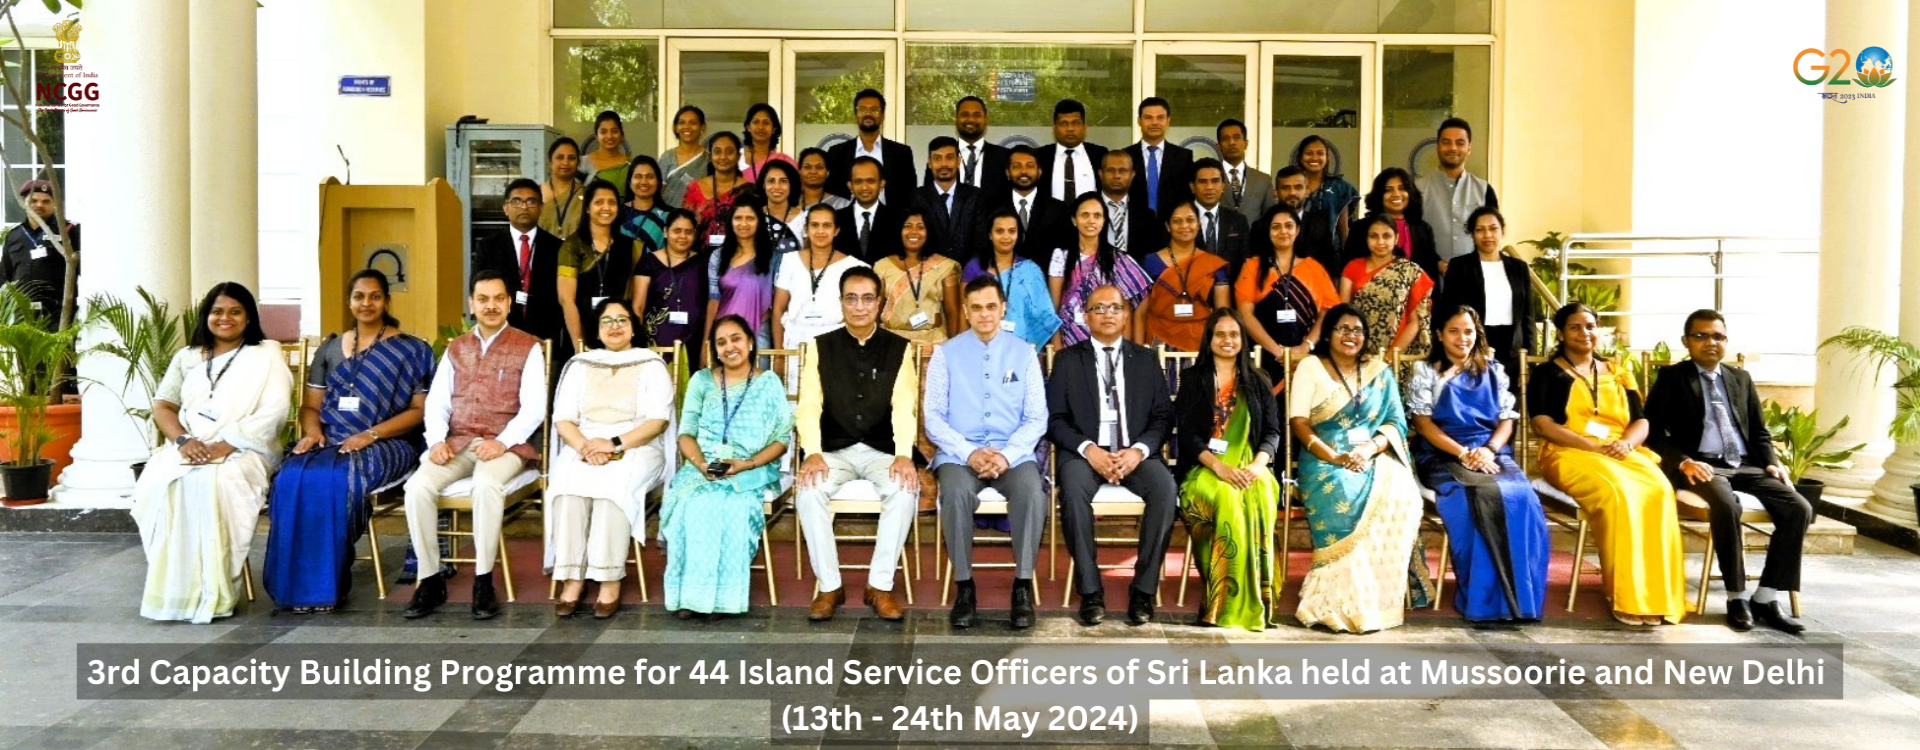 3rd Capacity Building Programme for the Island Services Officers of Sri Lanka